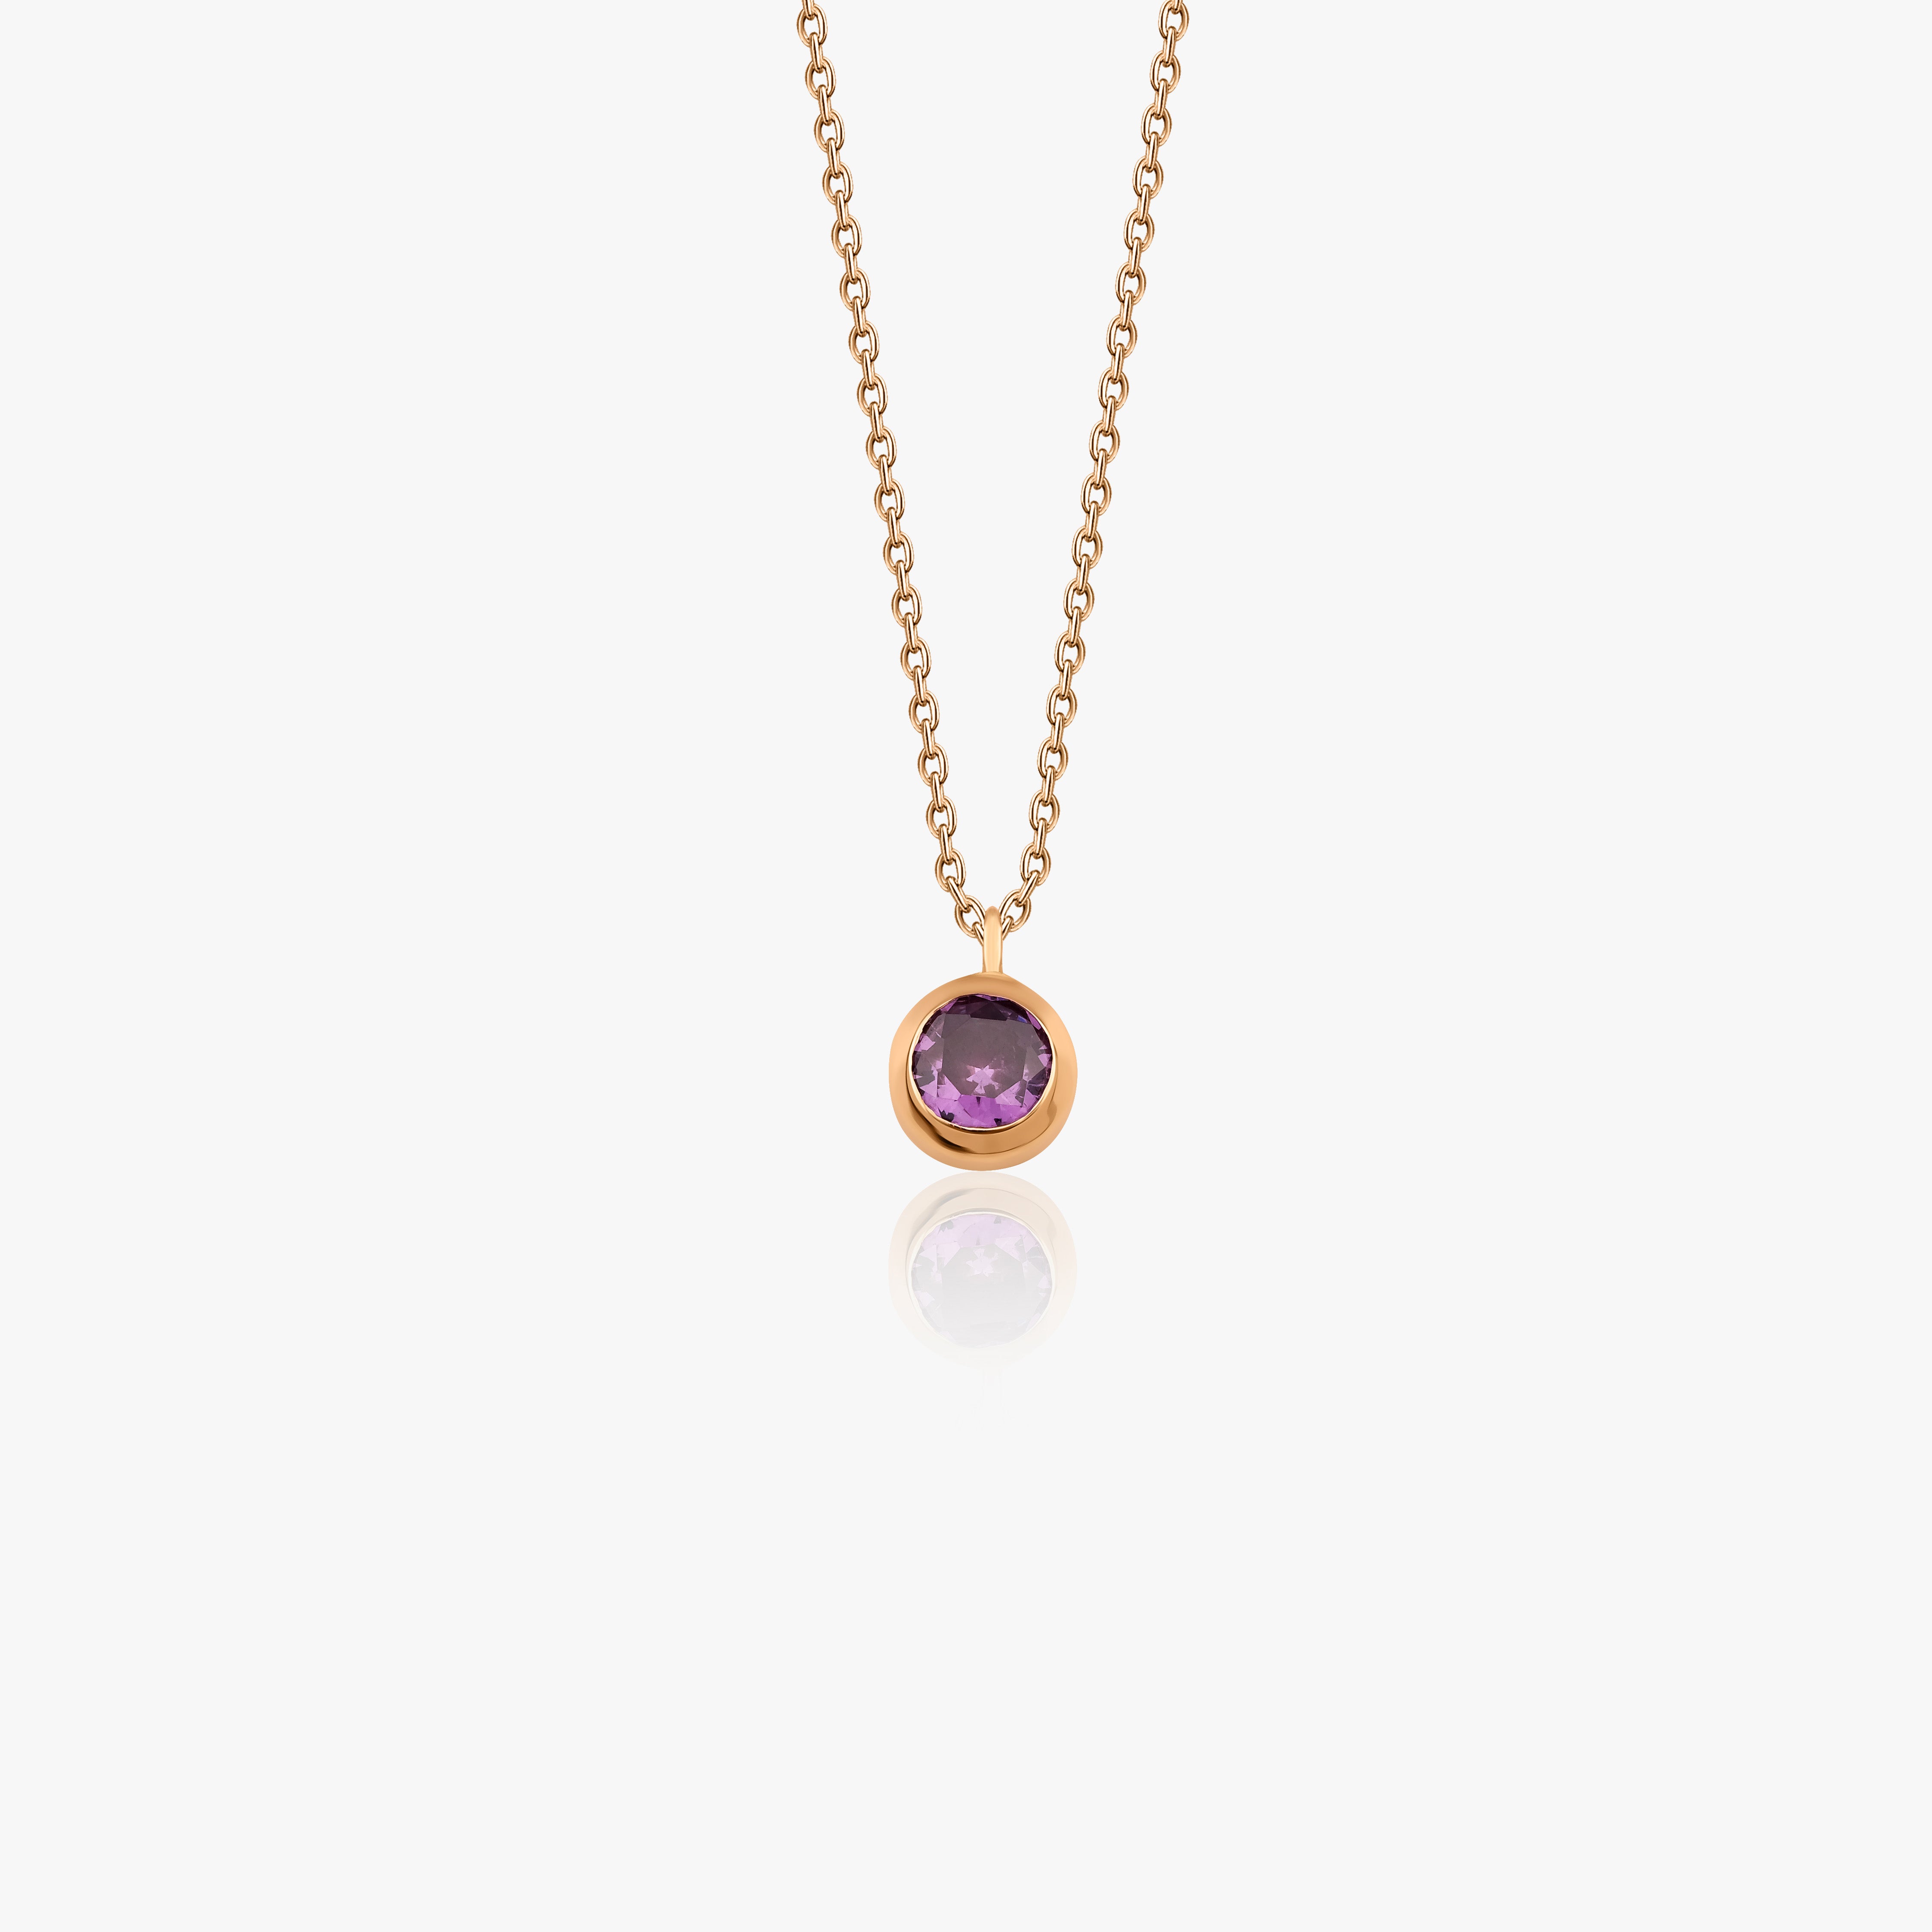 Bezel Set Amethyst Necklace Available in 14K and 18K Gold, February Birthstone Necklace